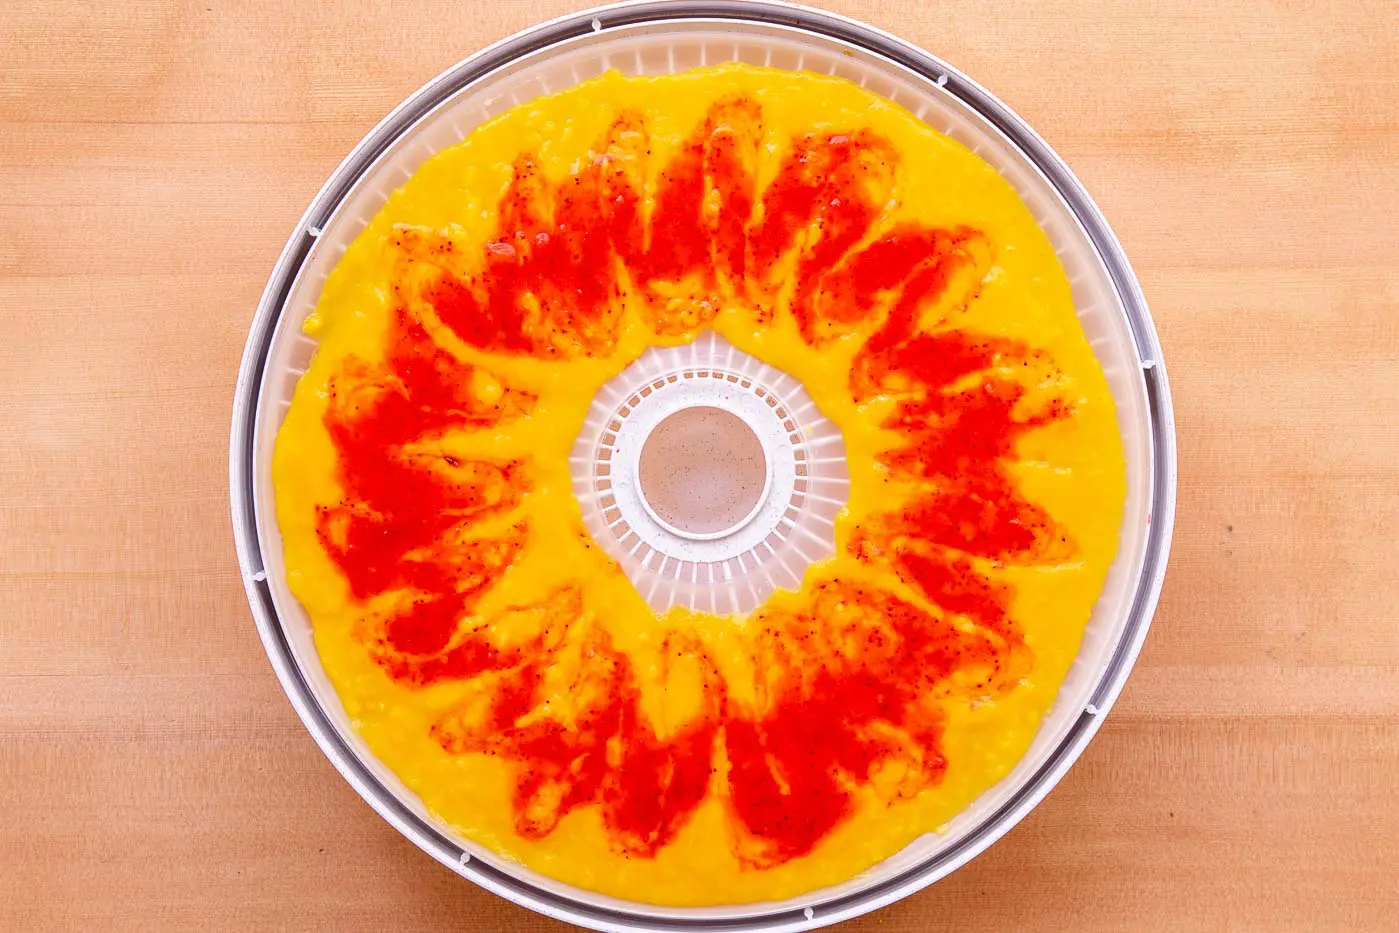 Dehydrator tray loaded with fruit puree